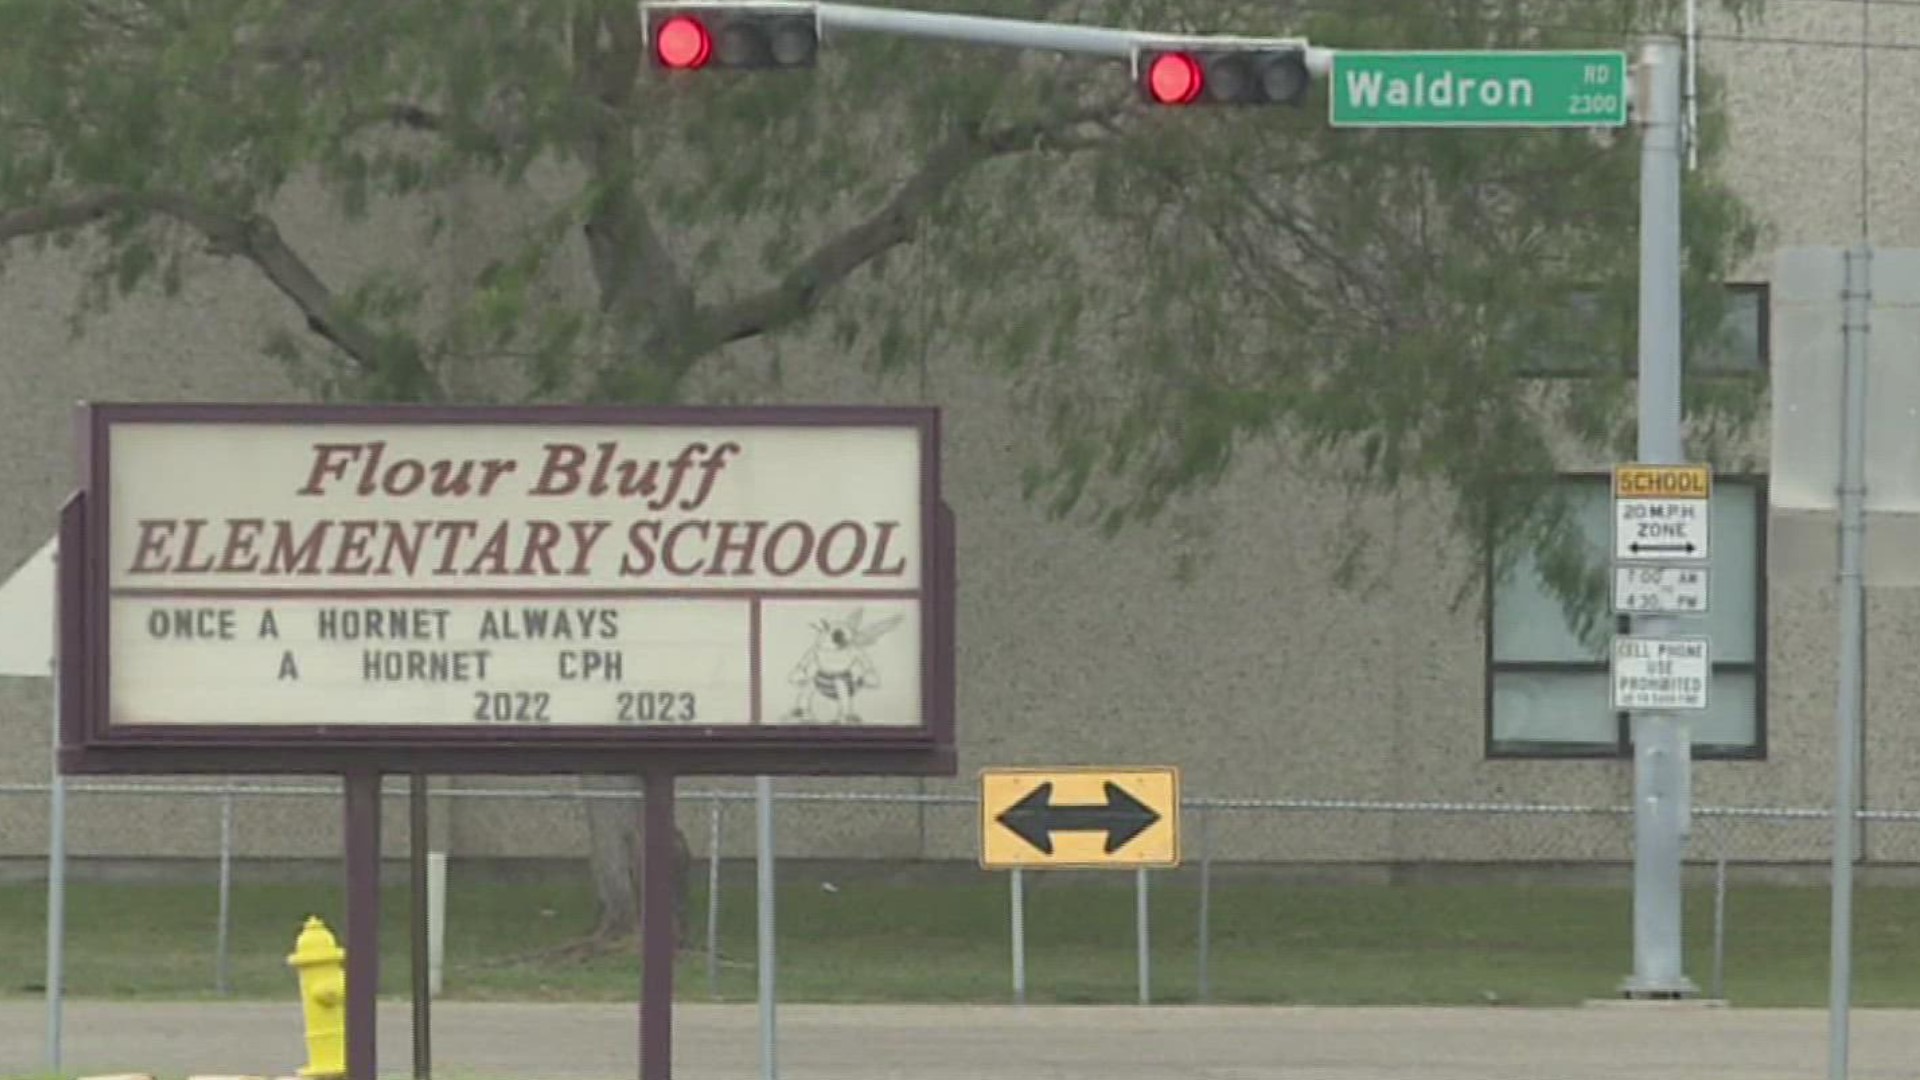 3NEWS spoke with officials to verify what the district's plans were